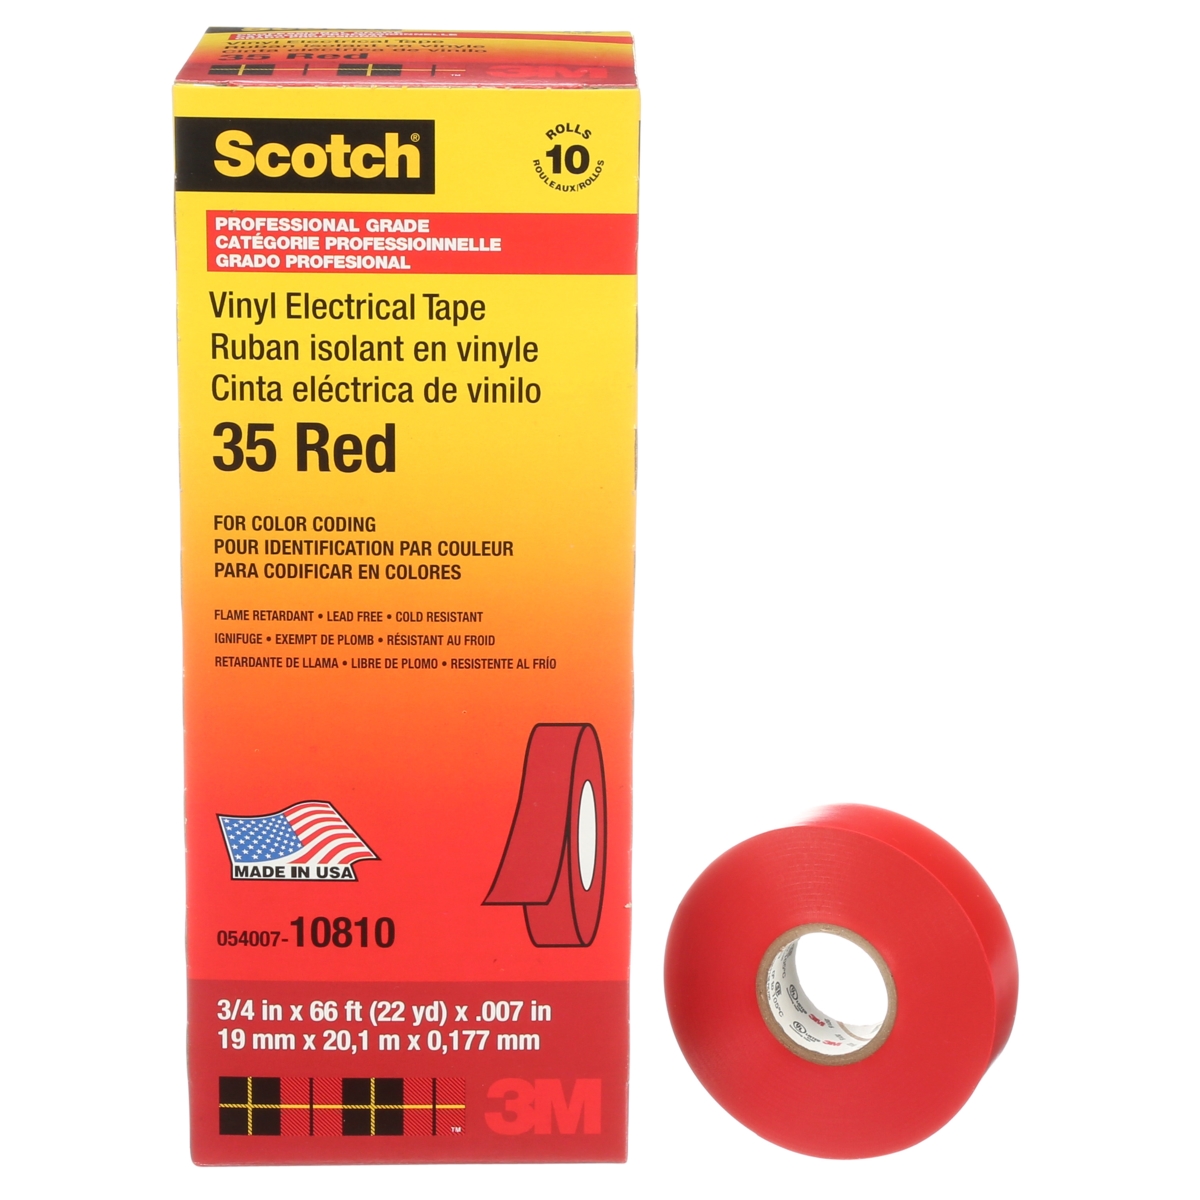 3M 2040 Scotch Solvent Resistant Masking Tape: 2 in x 60 yds